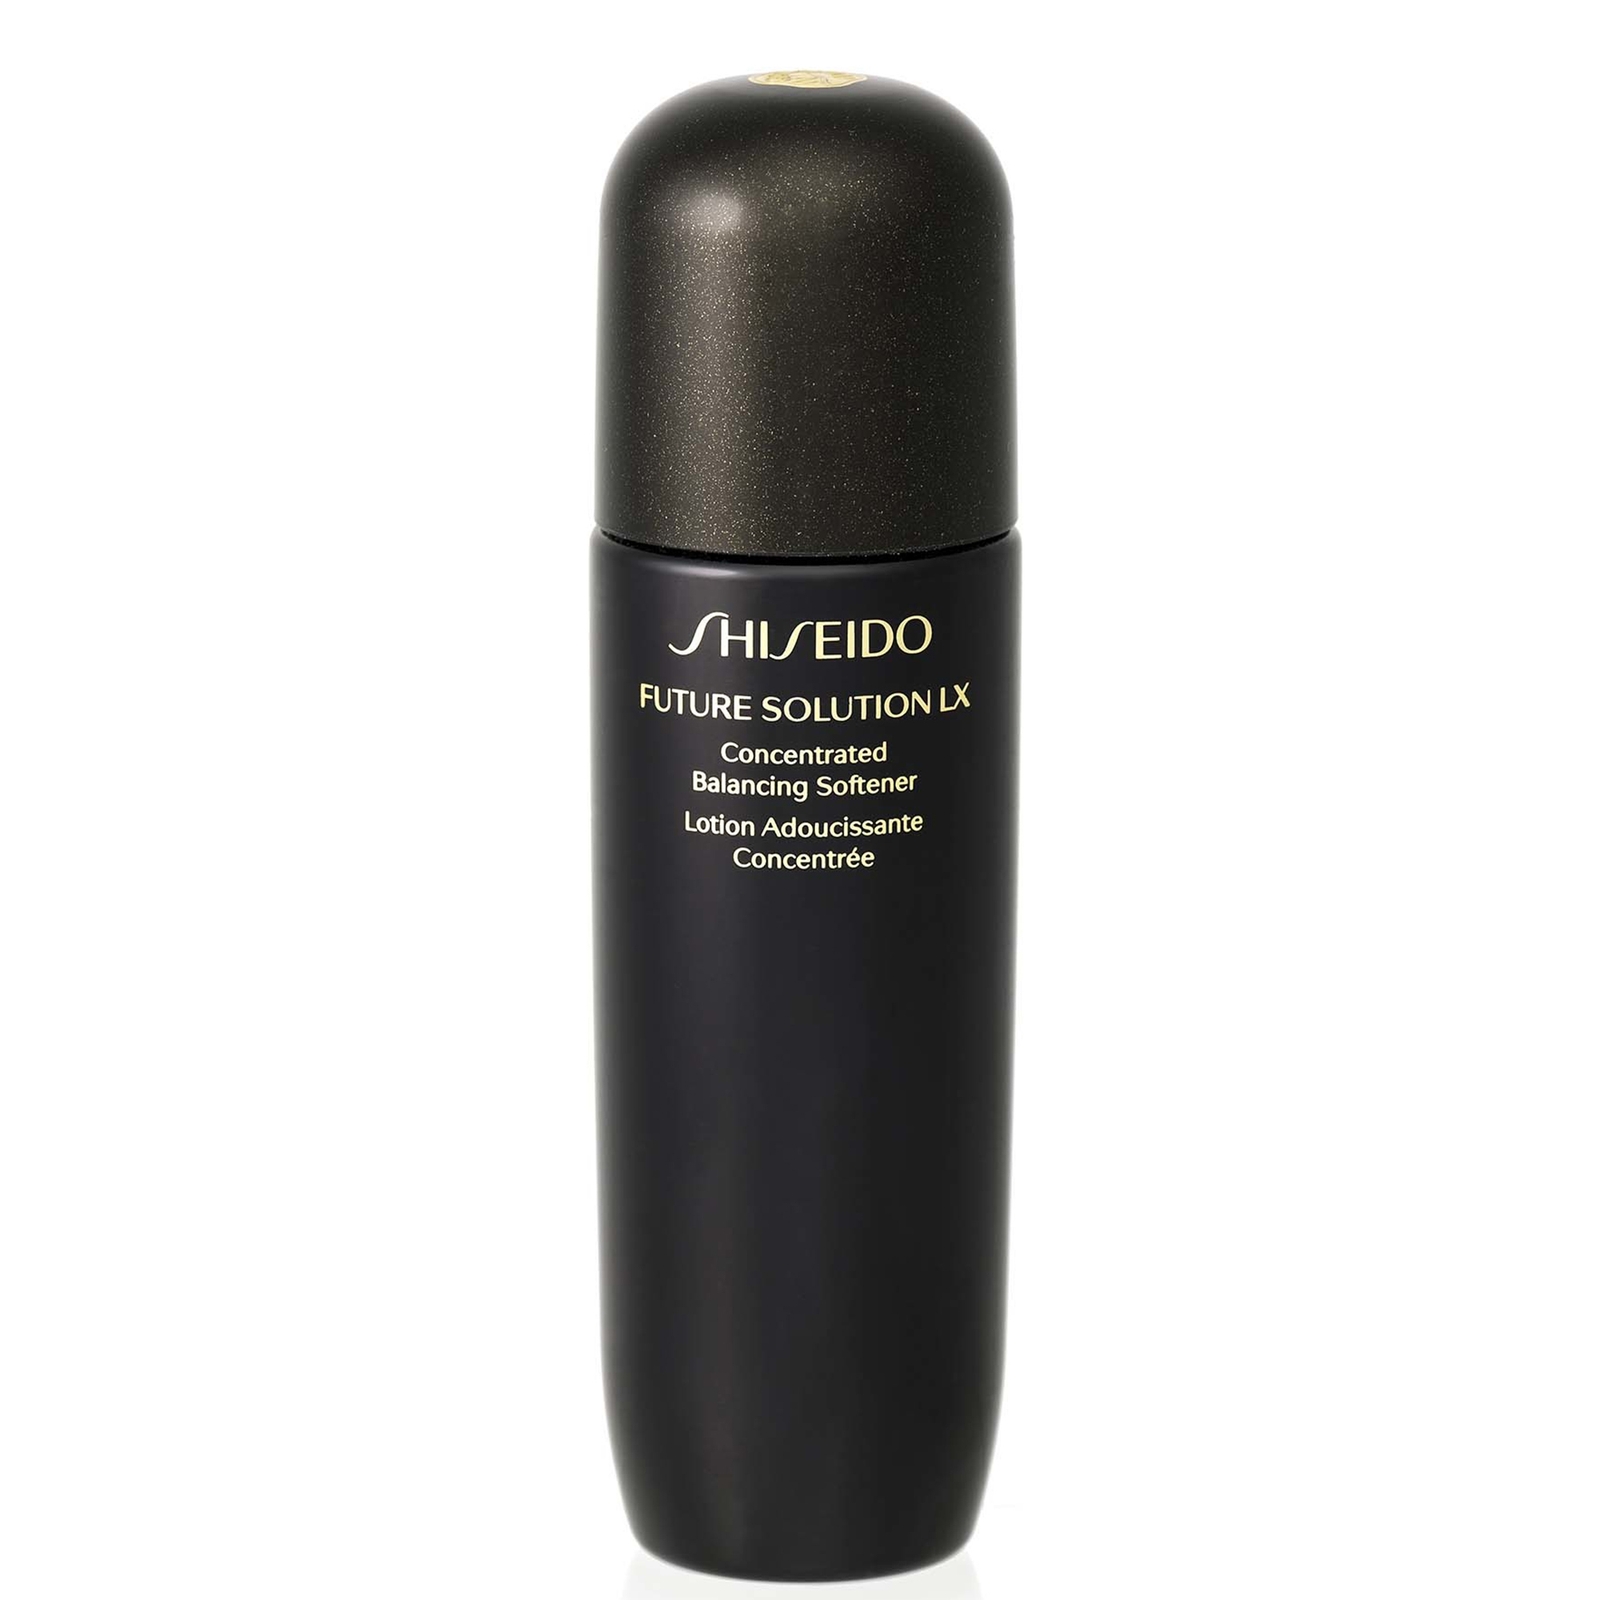 Photos - Other Cosmetics Shiseido Future Solution LX Concentrated Balancing Softener 170ml 10213916 